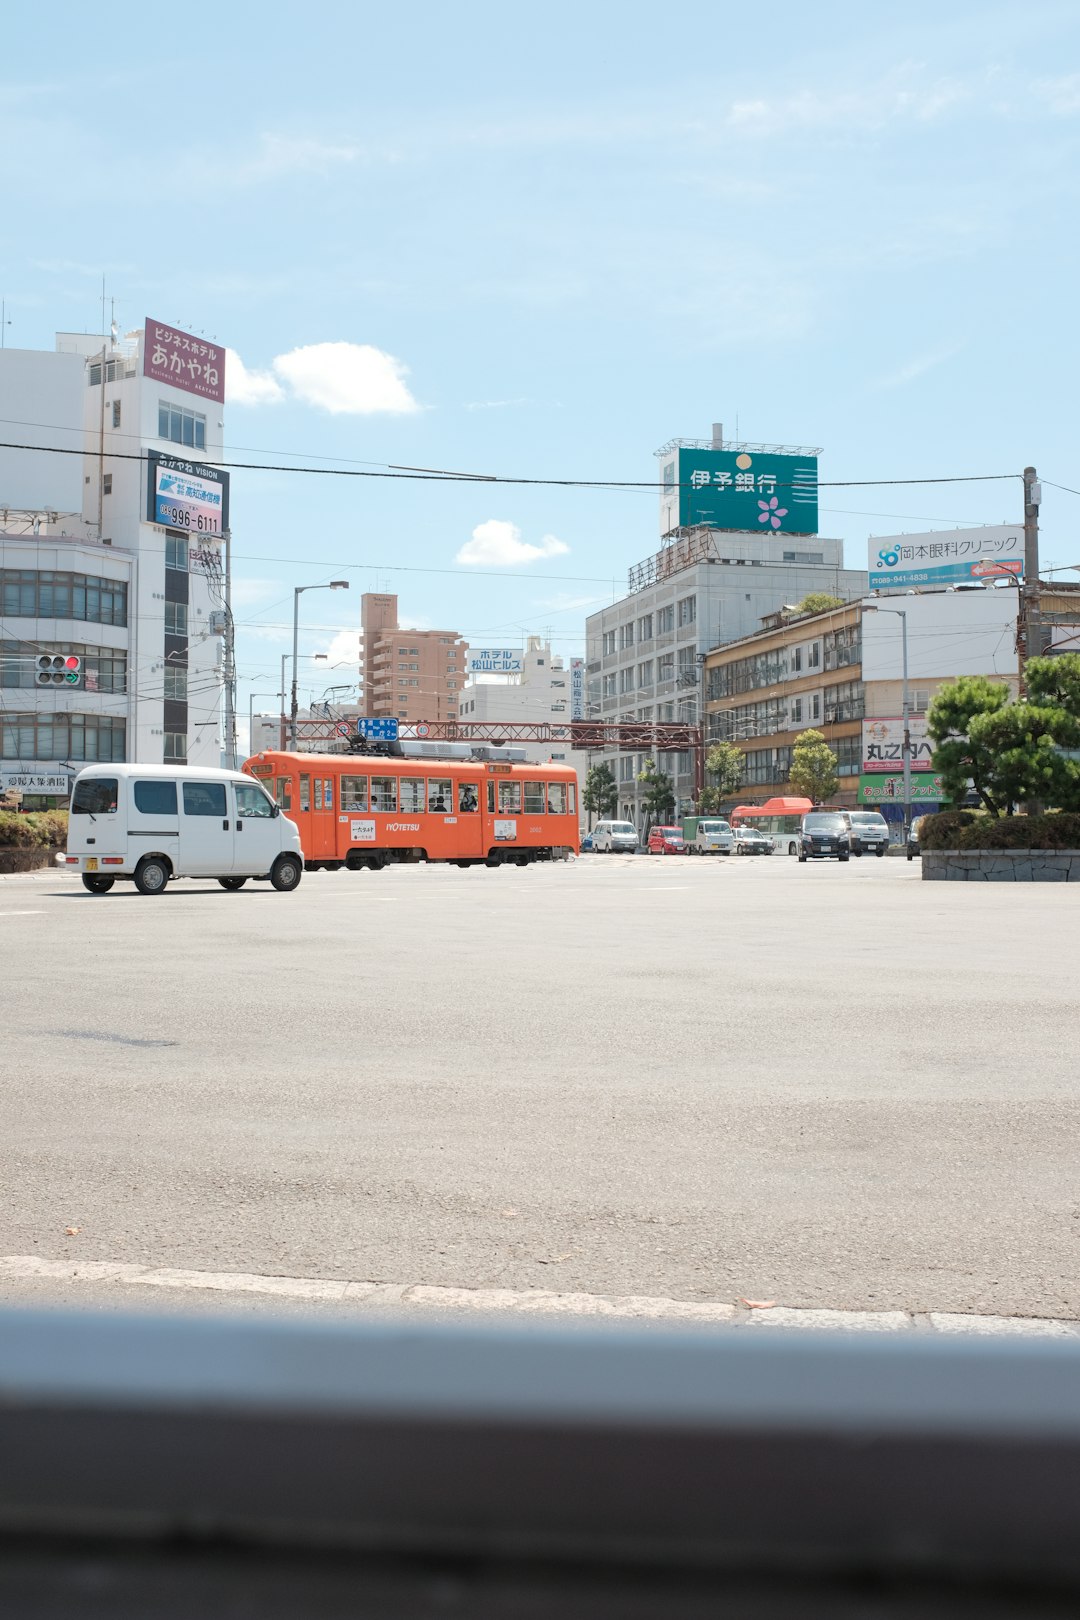 white and orange bus on road during daytime